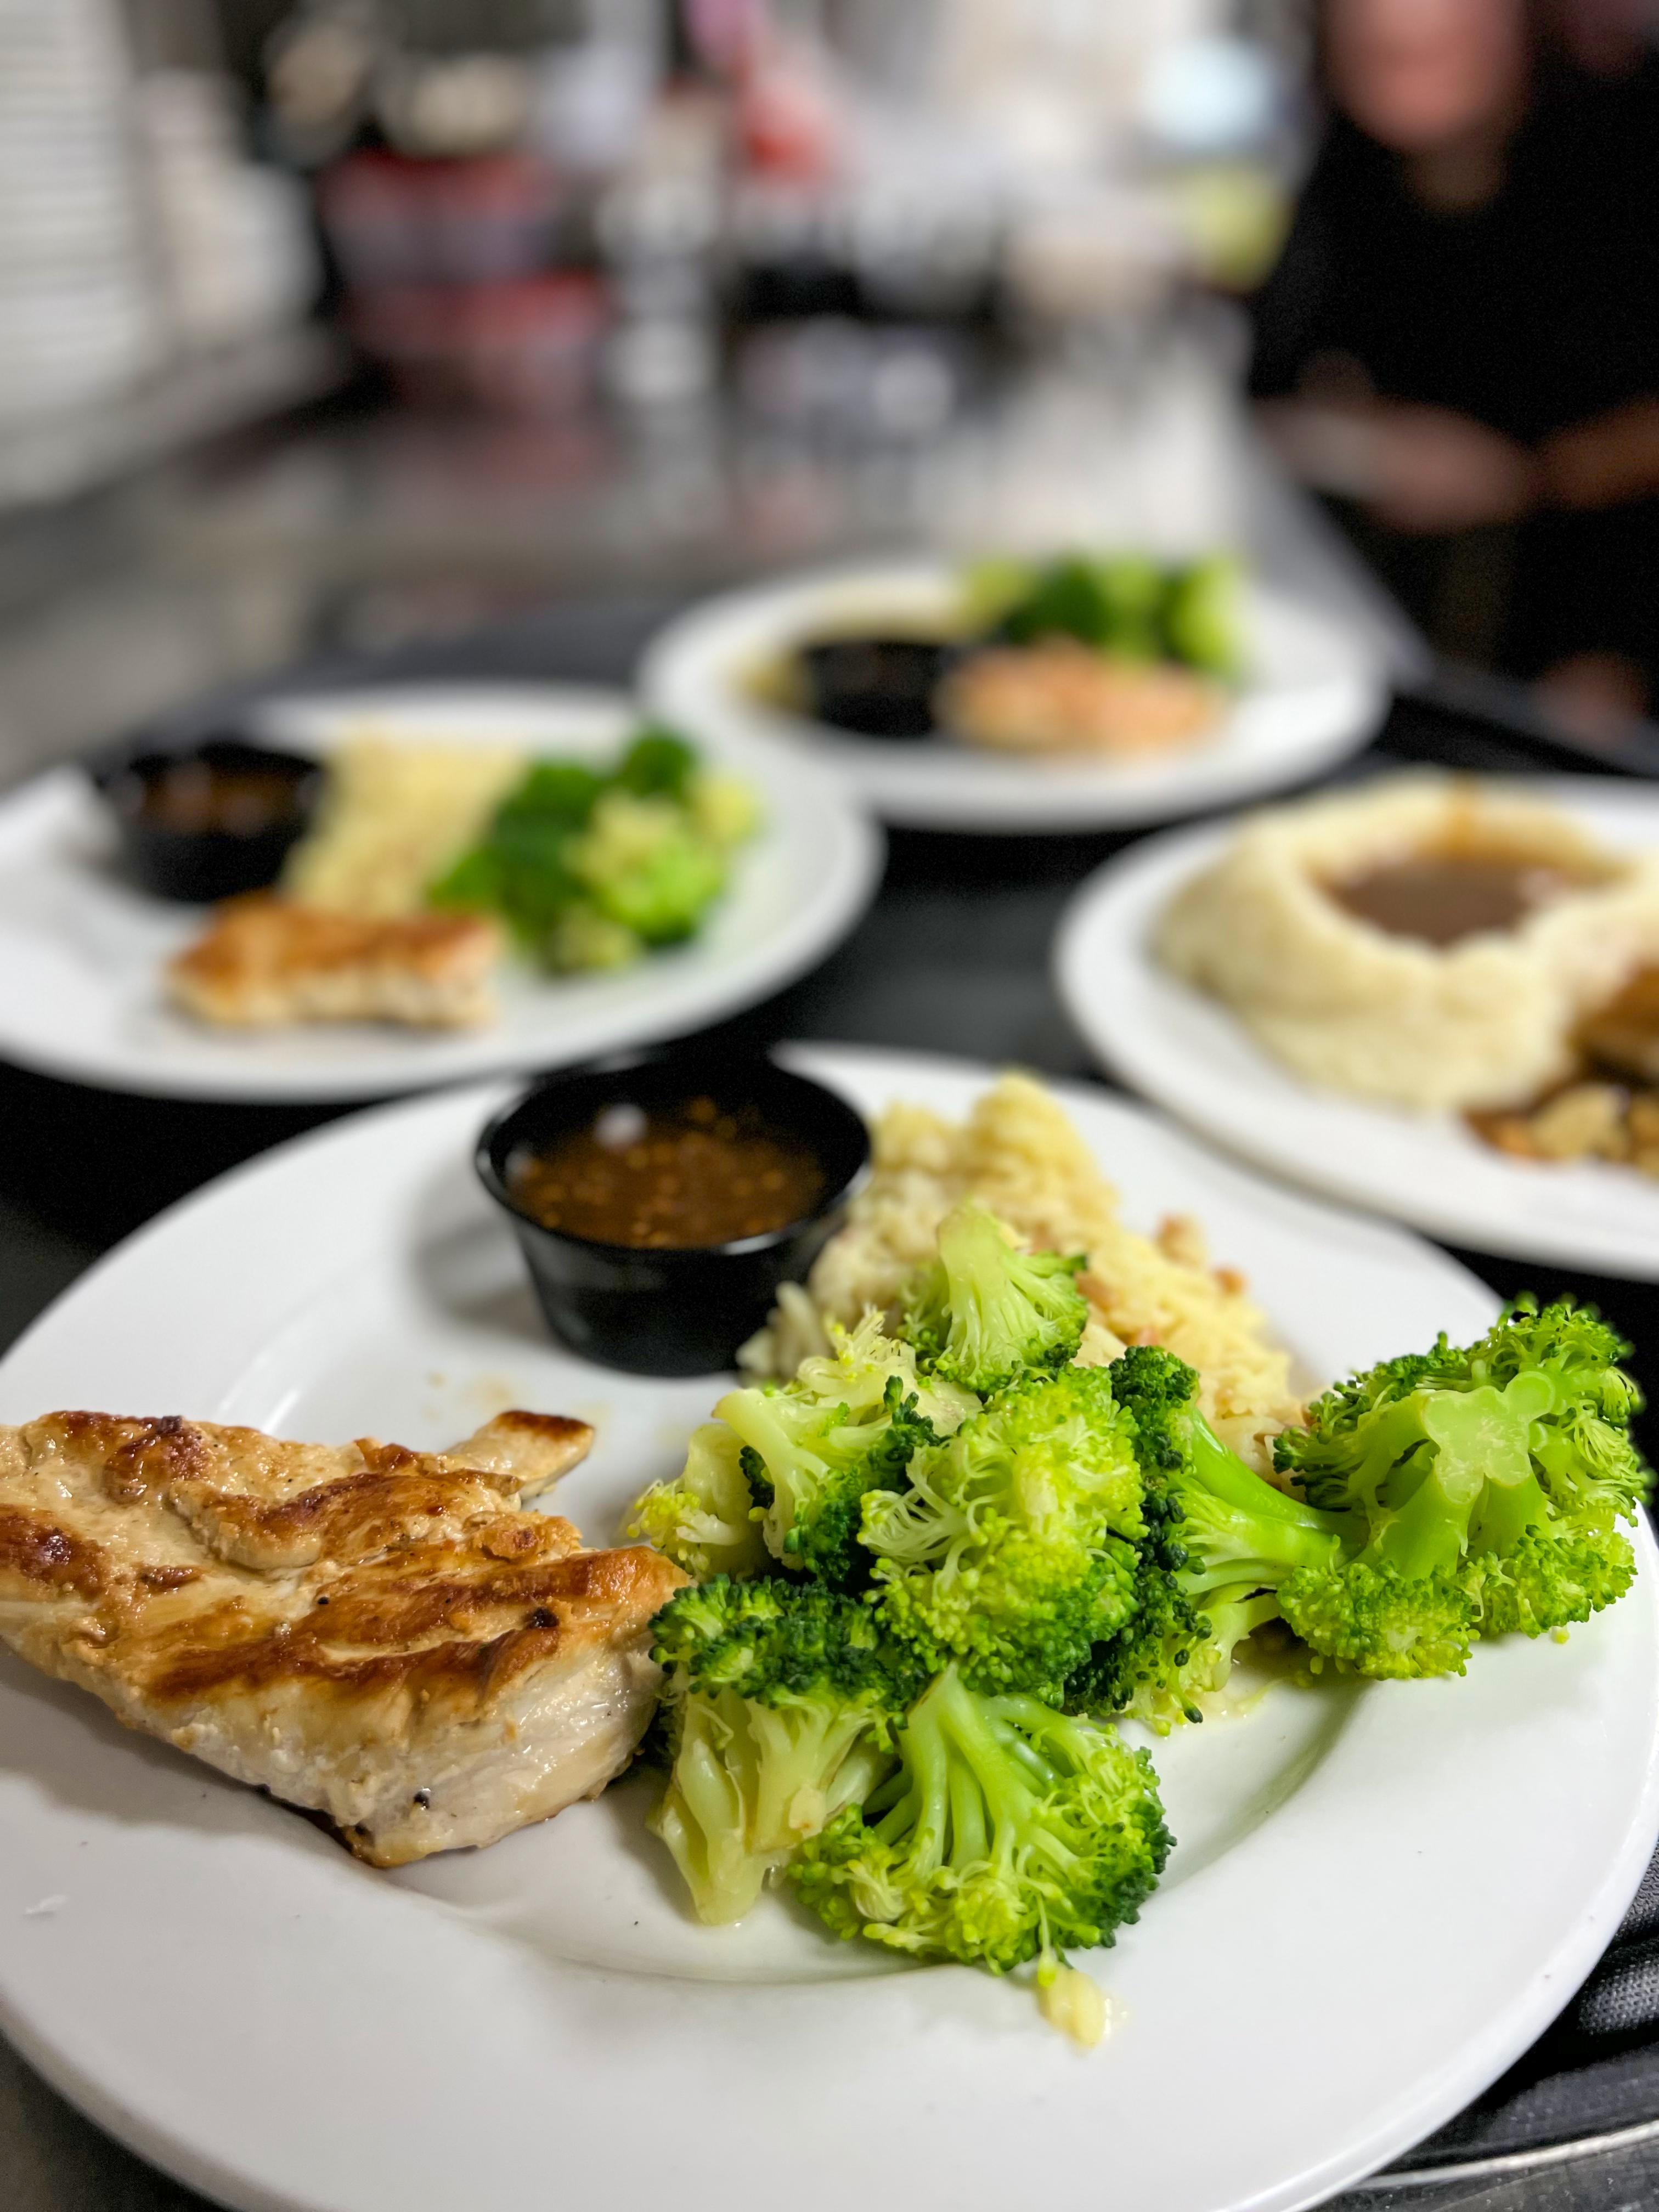 Chicken and Broccoli meal from The Dream Restaurant